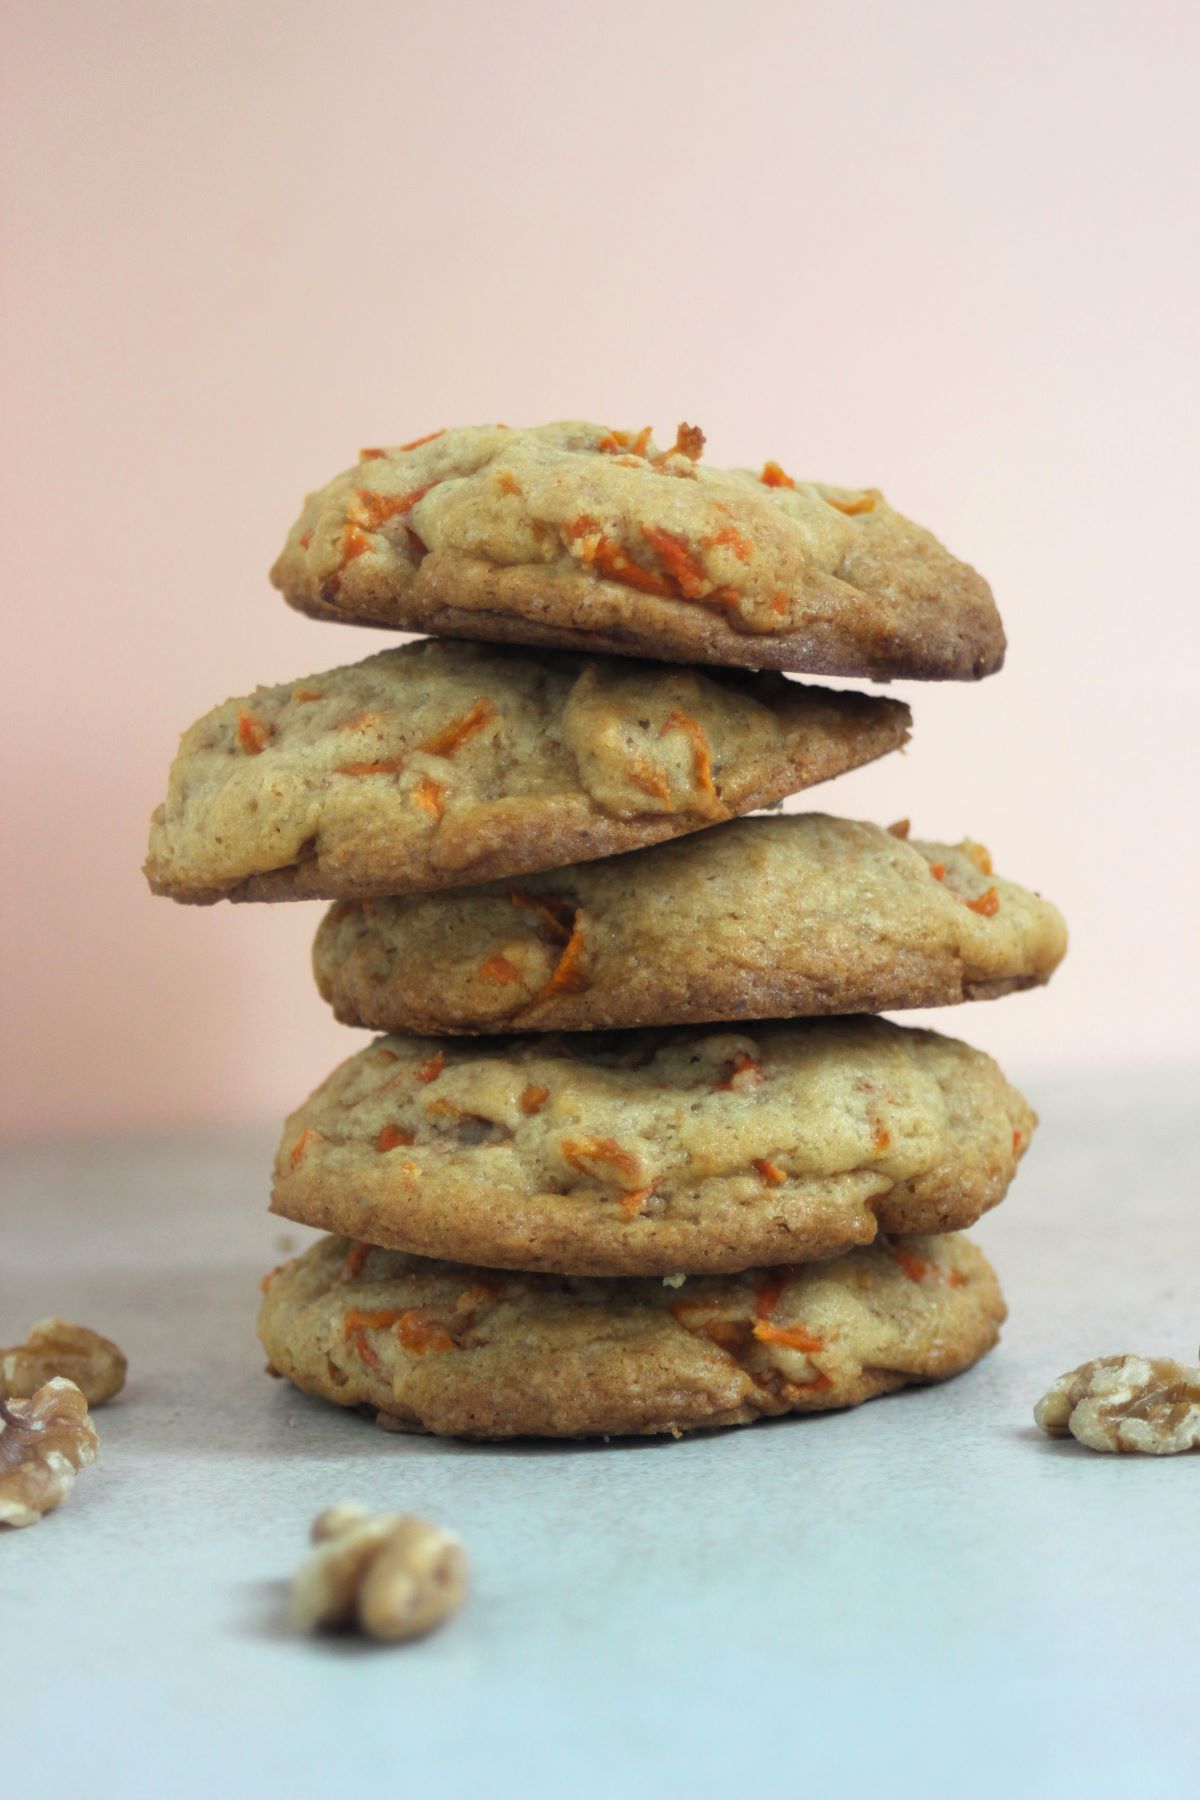 A tower of carrot cake cookies on a white surface, Pink background.